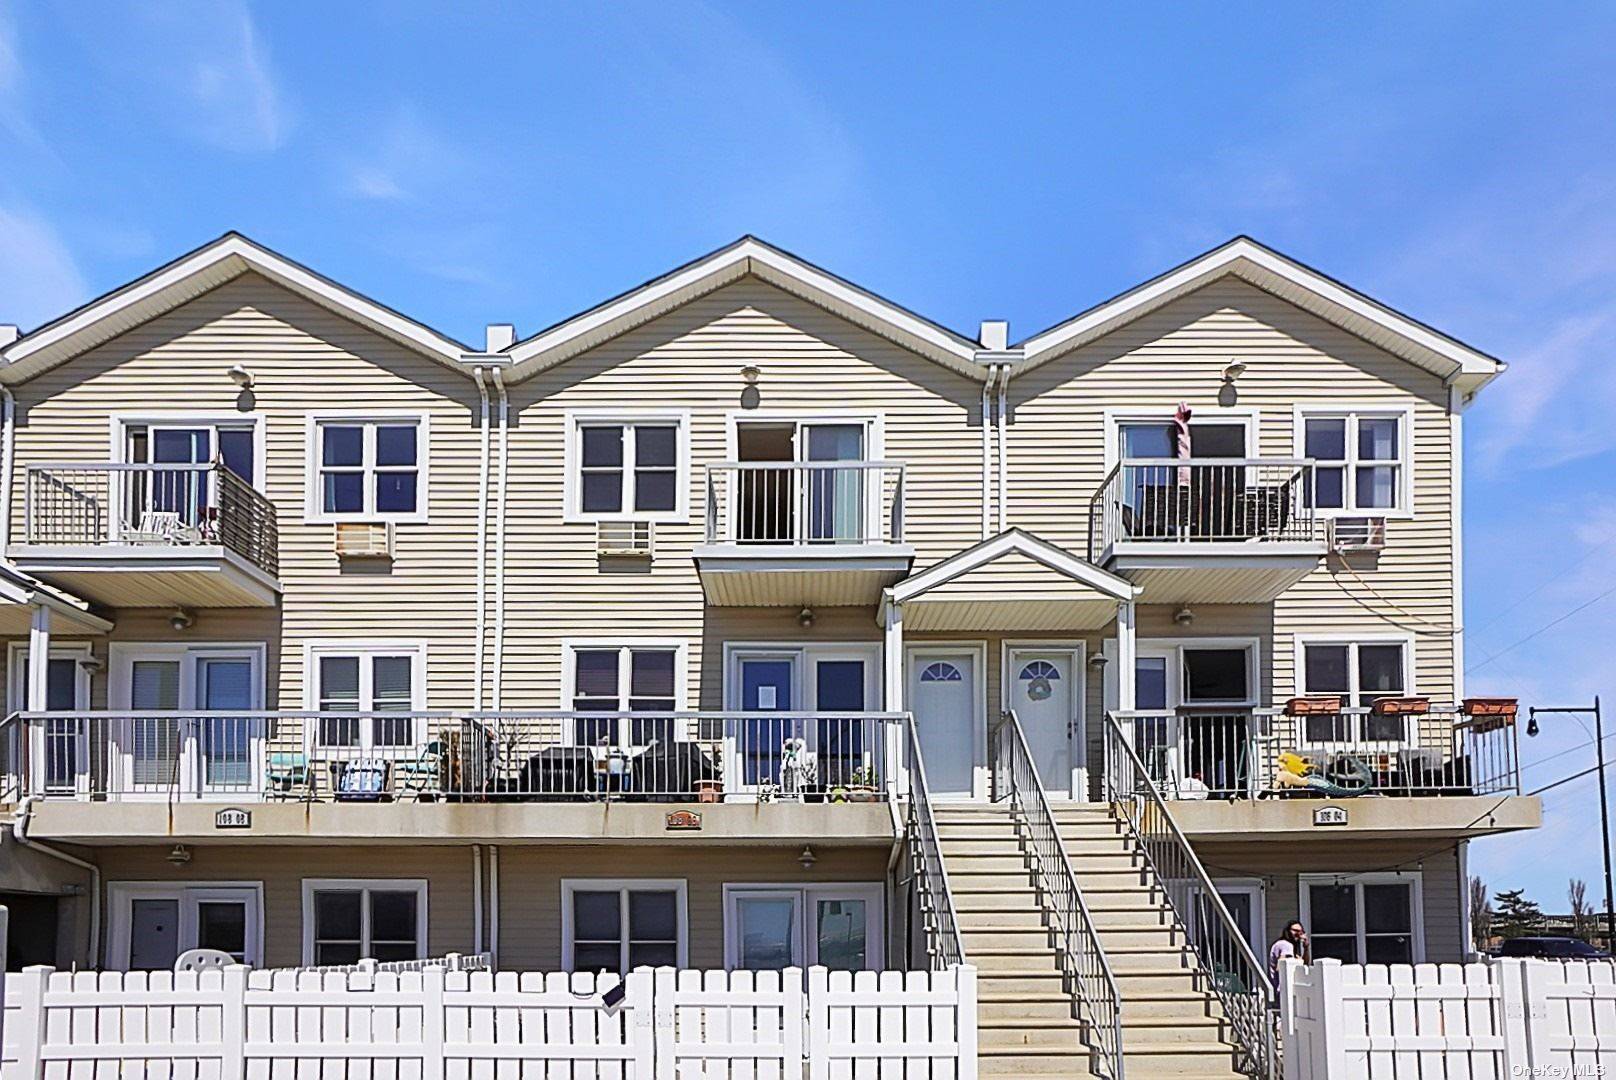 Immerse yourself in the extraordinary charm of this Rockaway Beach Boardwalk Retreat, where cherished memories amp ; outdoor adventures await.